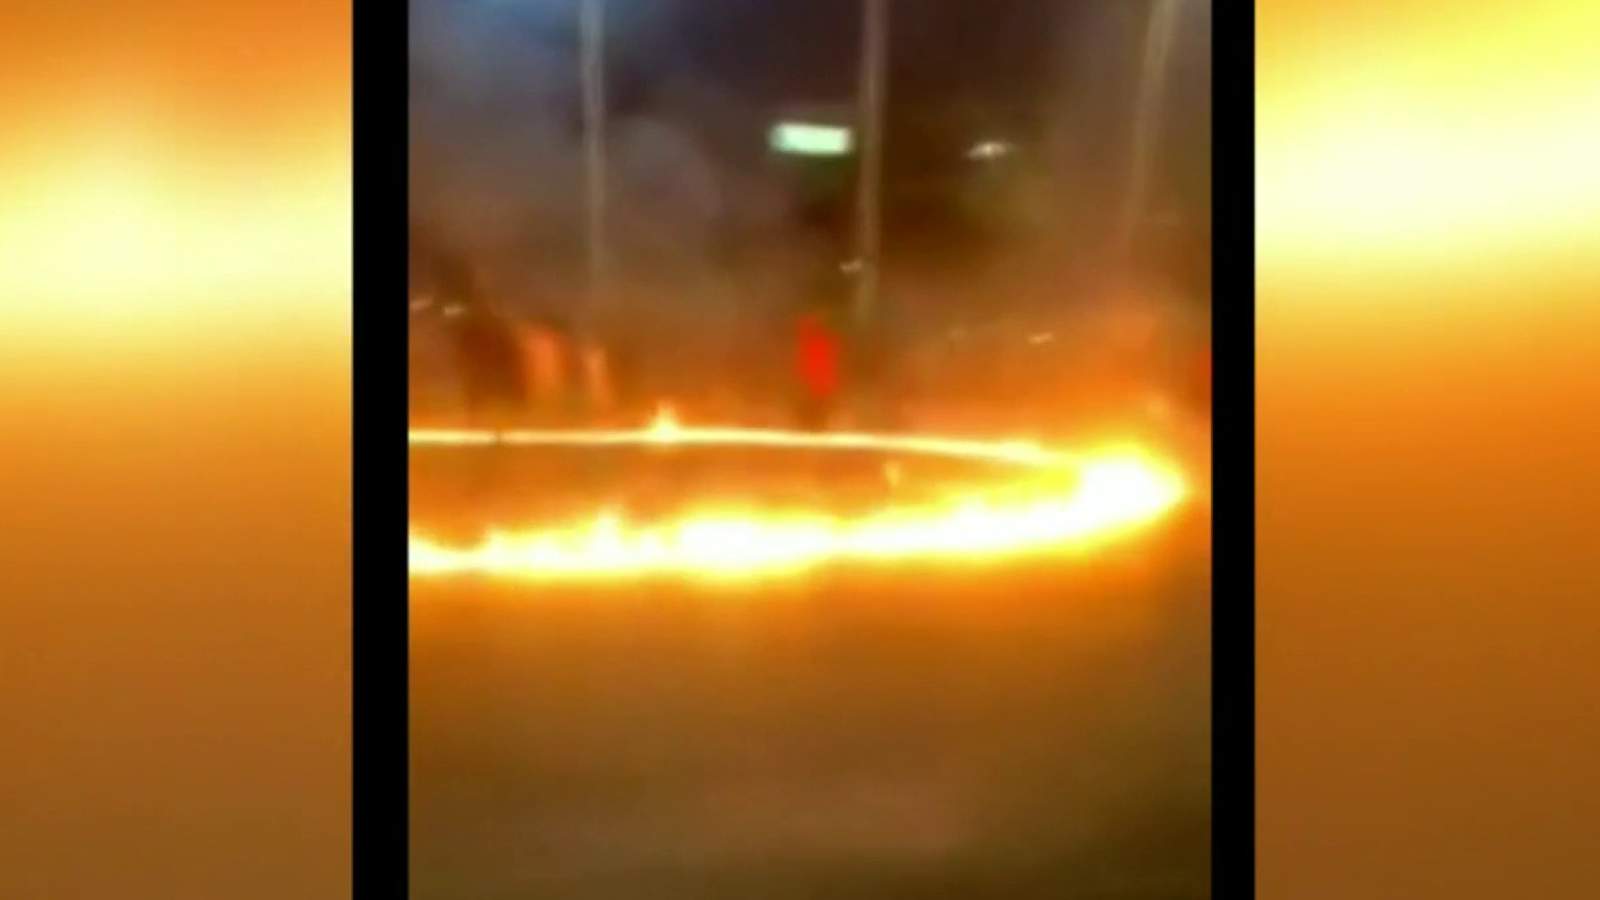 Video shows ring of fire as driver ‘drifts’ in Detroit intersection